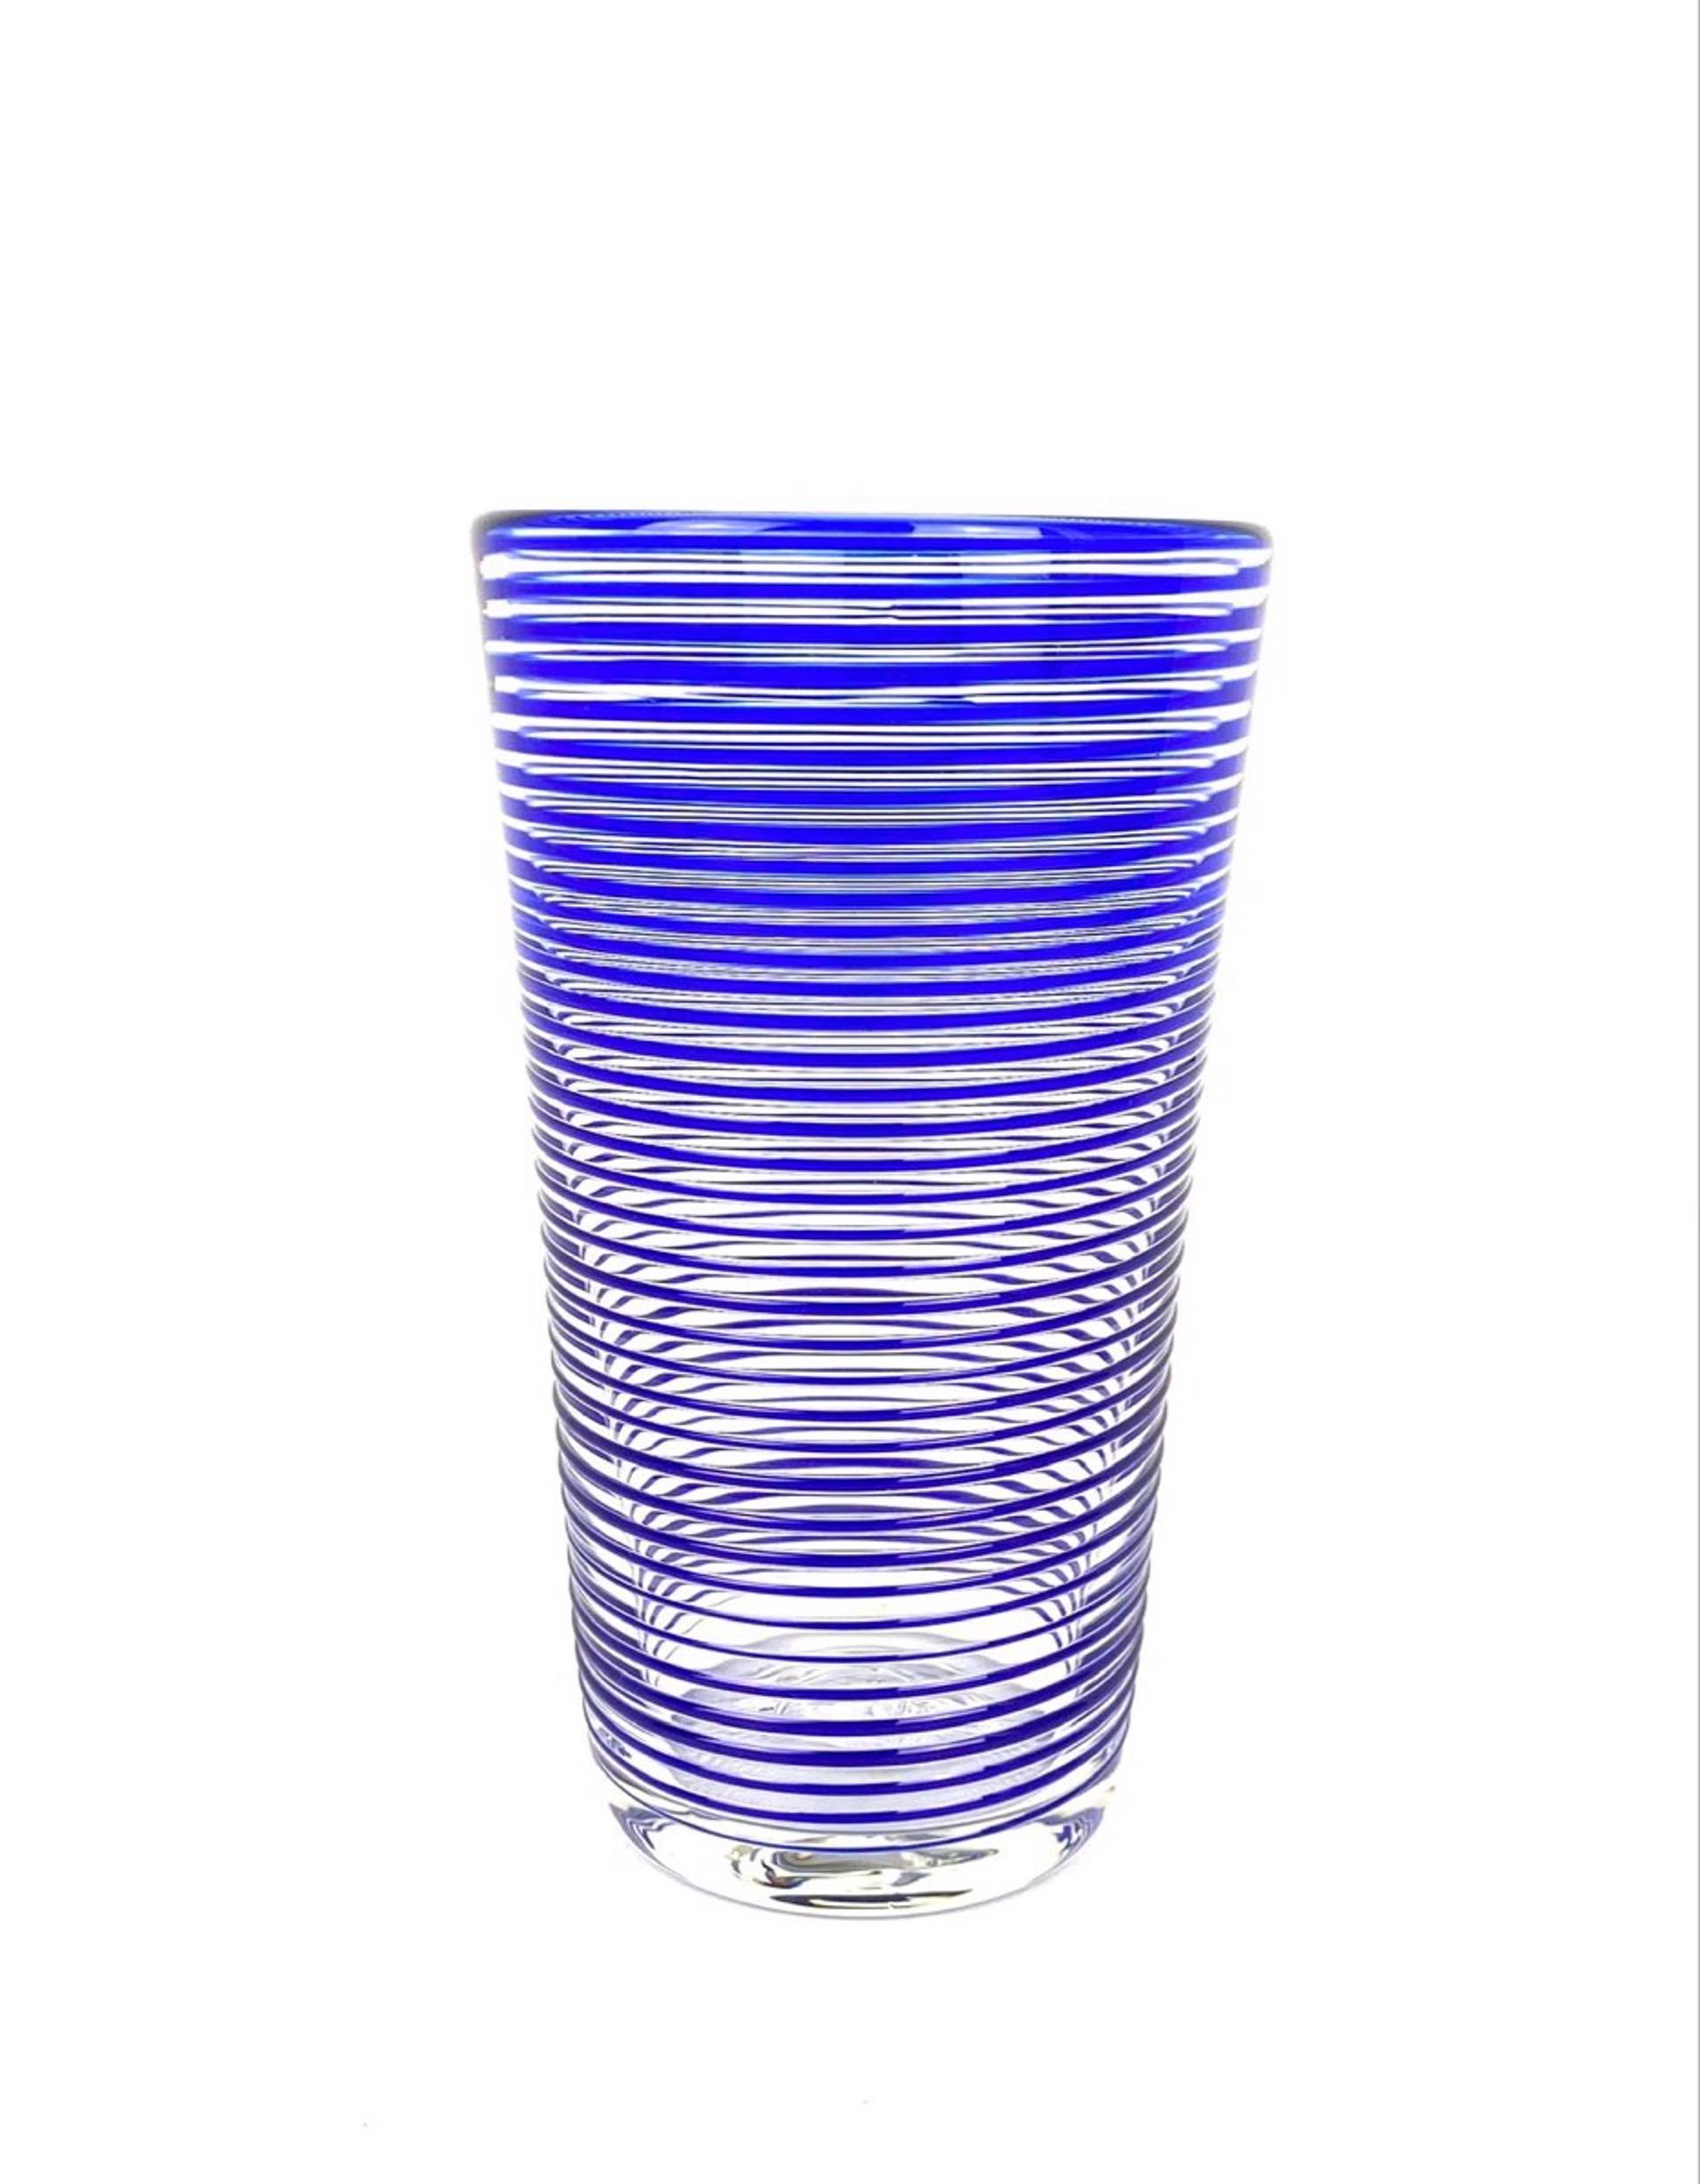 Threaded Tumbler by Chad Balster